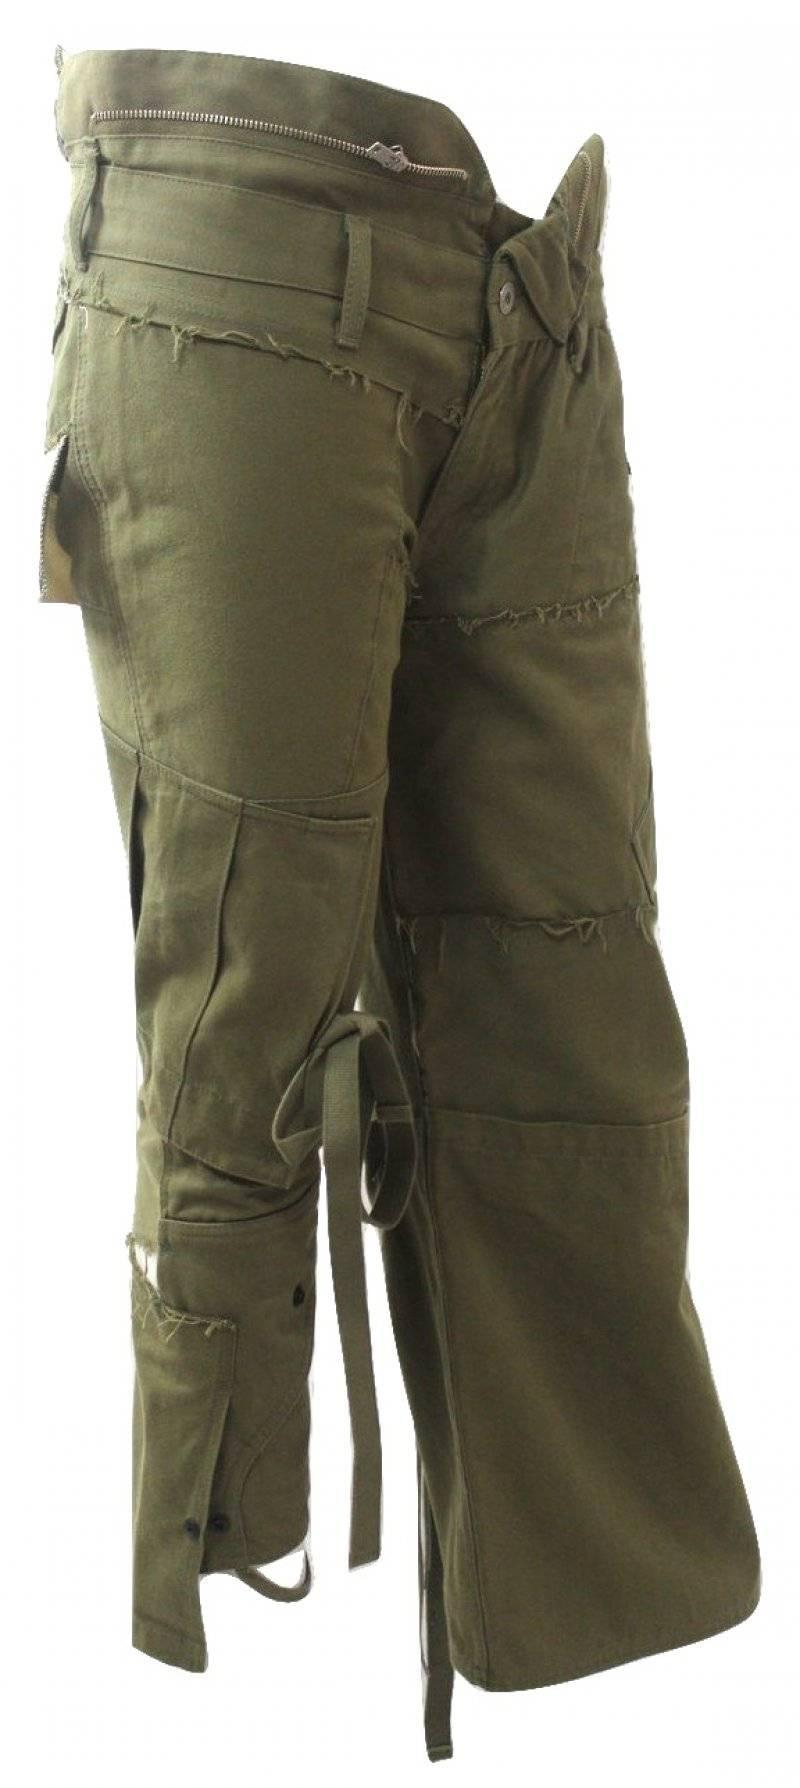 Junya Watanabe 2006 Collection
Wide and Narrow Leg Runway Cargo Pants
Labelled size SS
Excellent condition